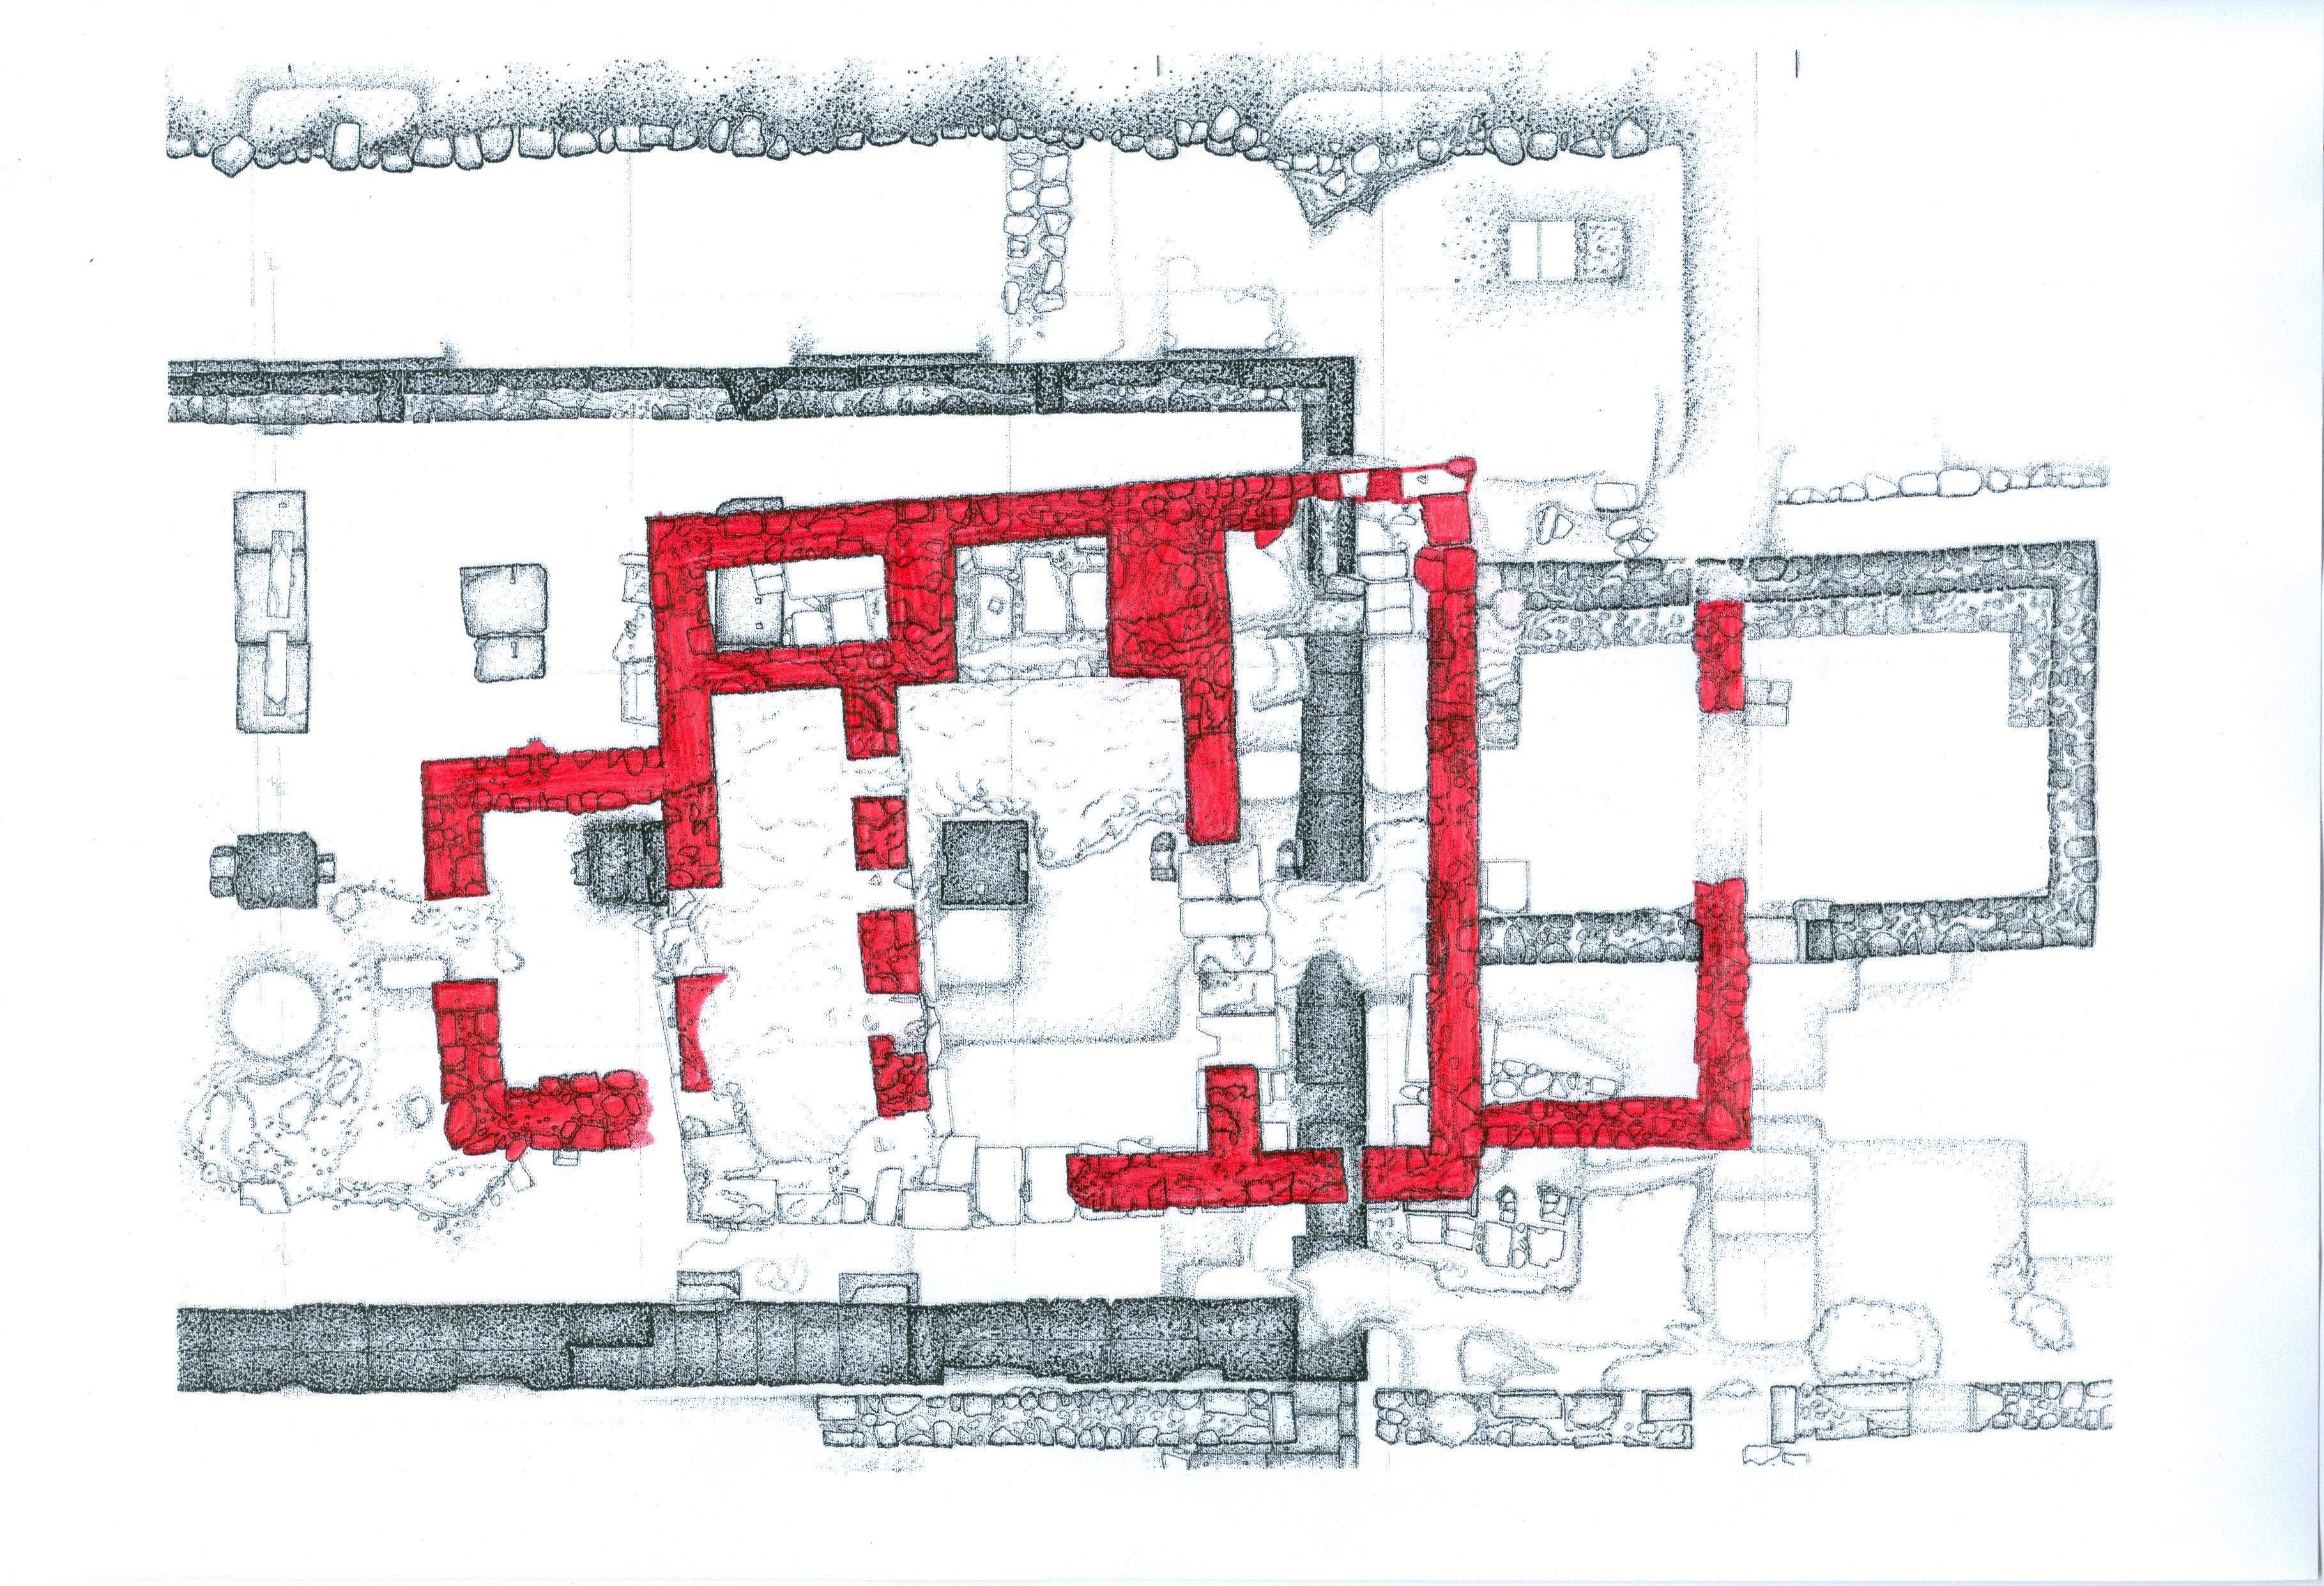 Partial plan of the Western Hill with the Byzantine Industrial Complex shaded red.